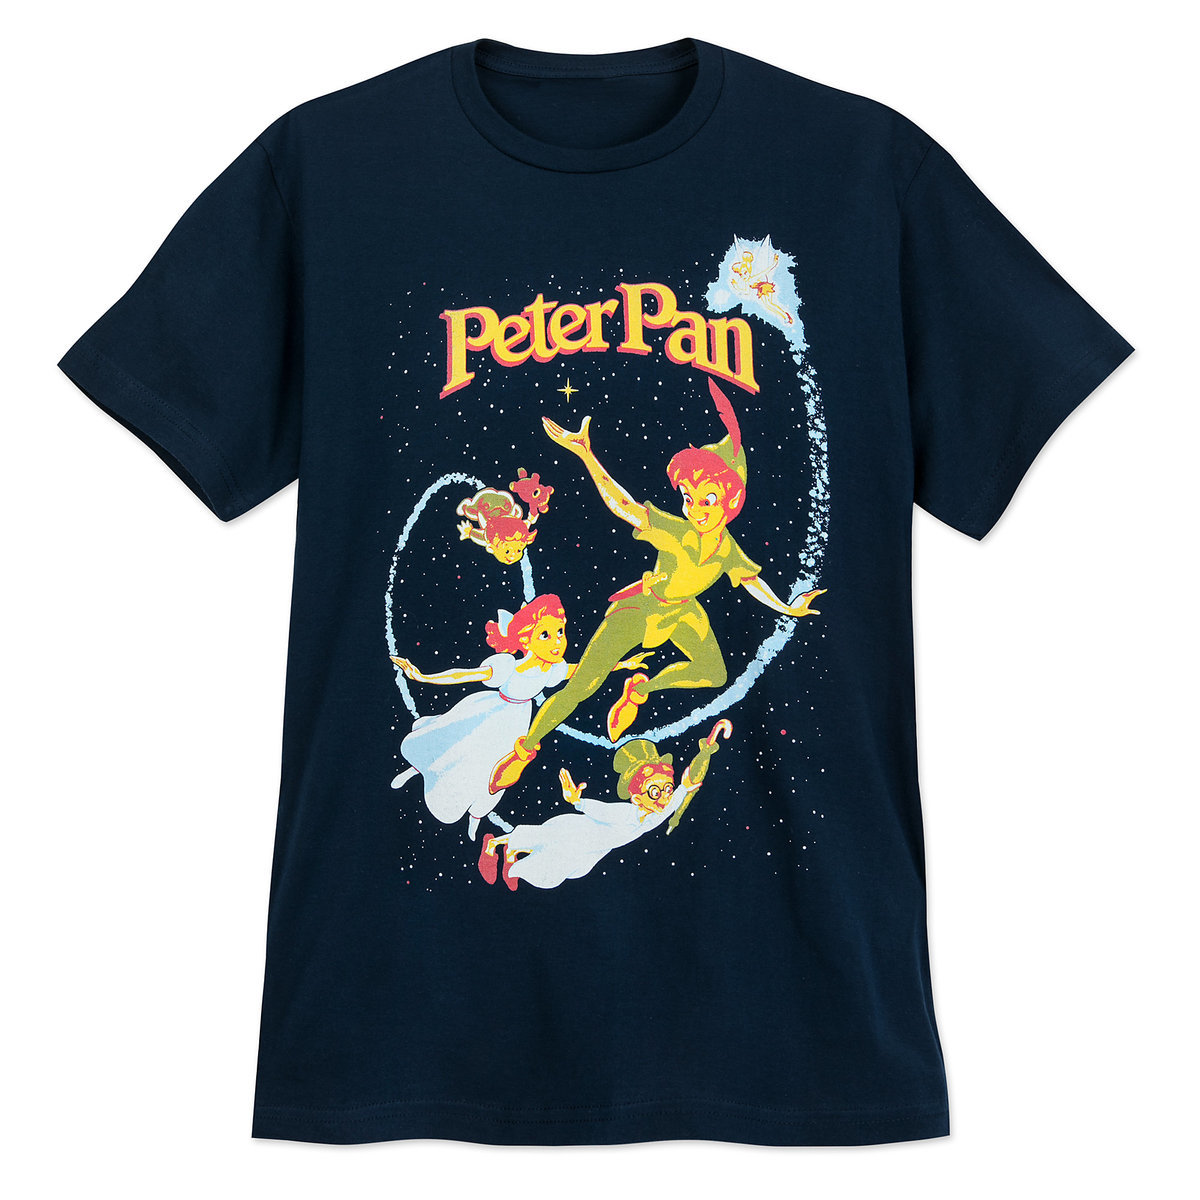 New Classic Disney Movies TShirts Out Now